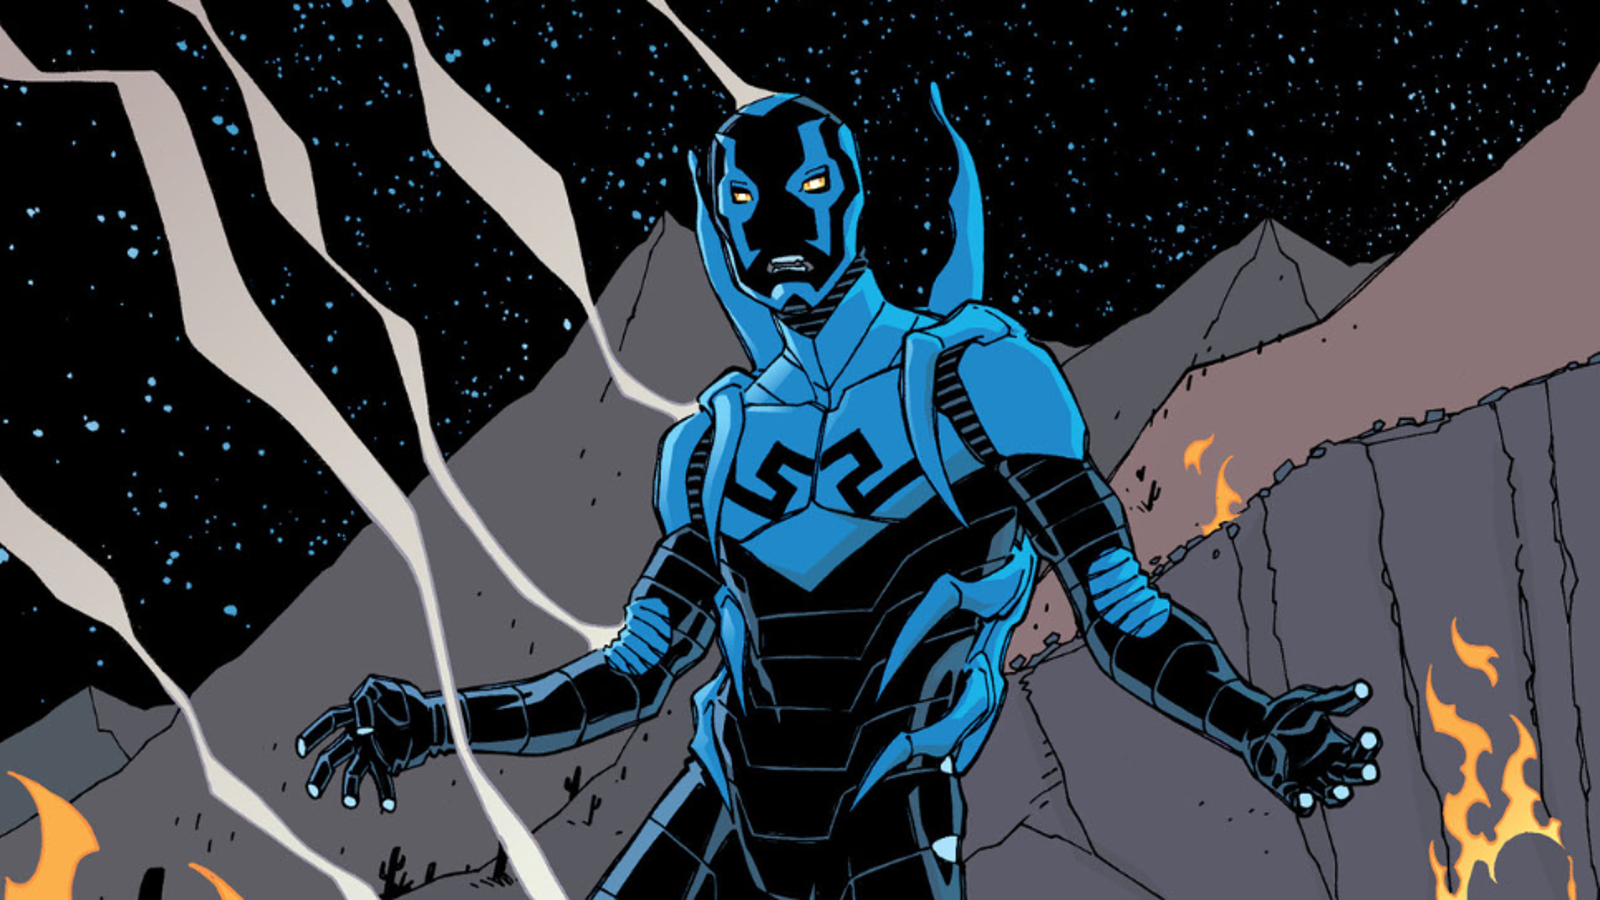 Blue Beetle trailer introduces a new hero to the DC Universe